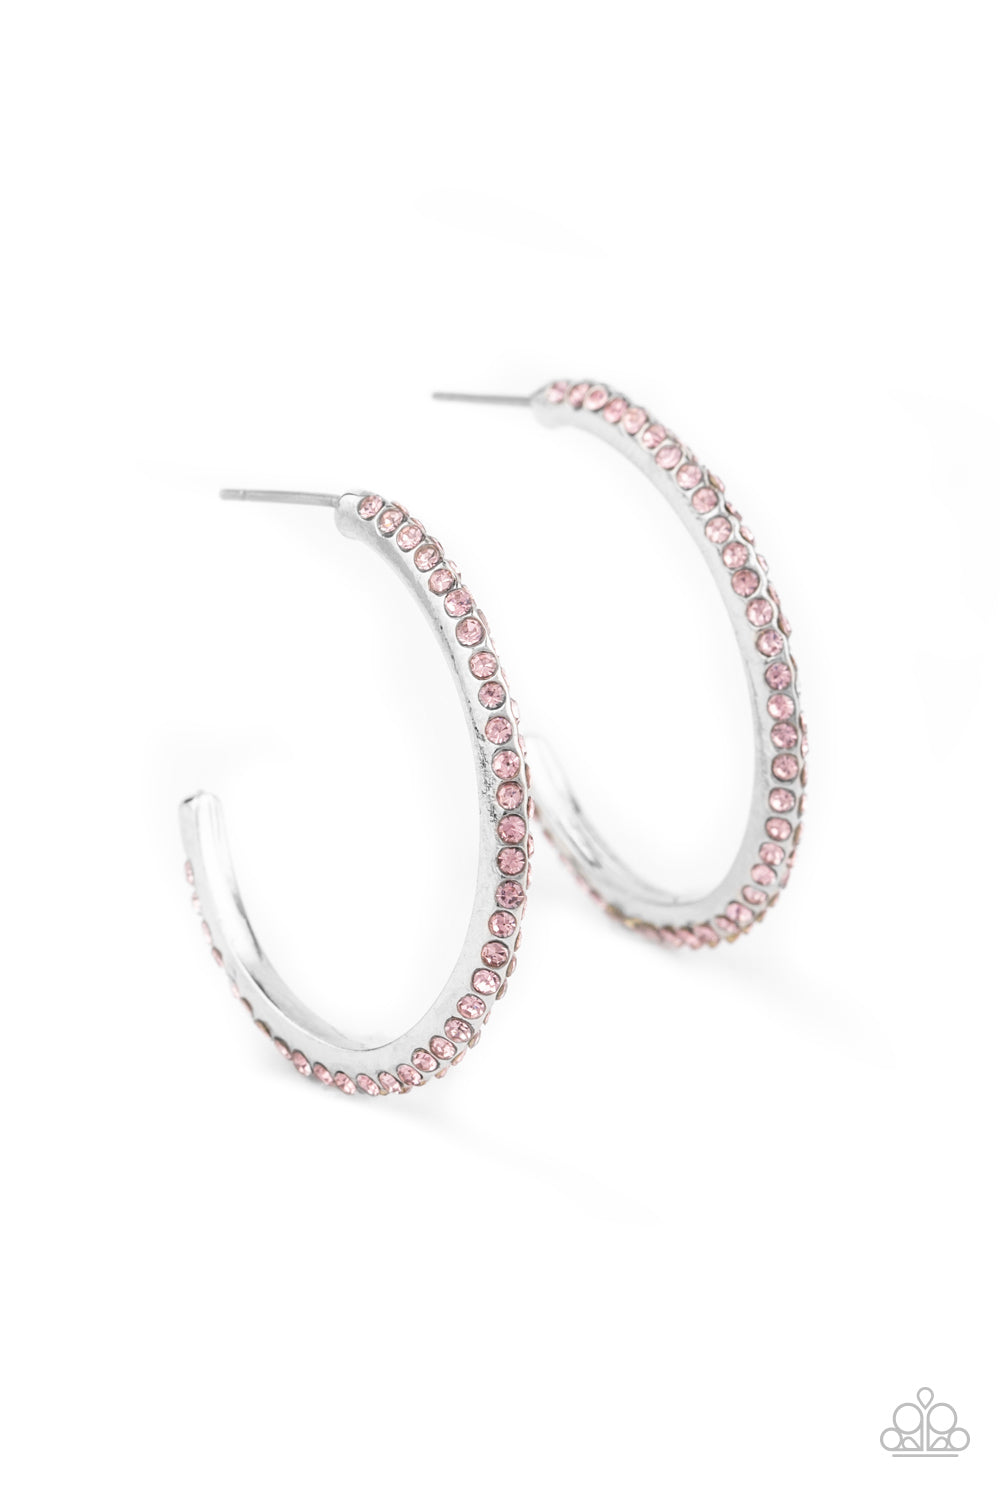 Dont Think Twice - Pink Paparazzi Hoop Earrings